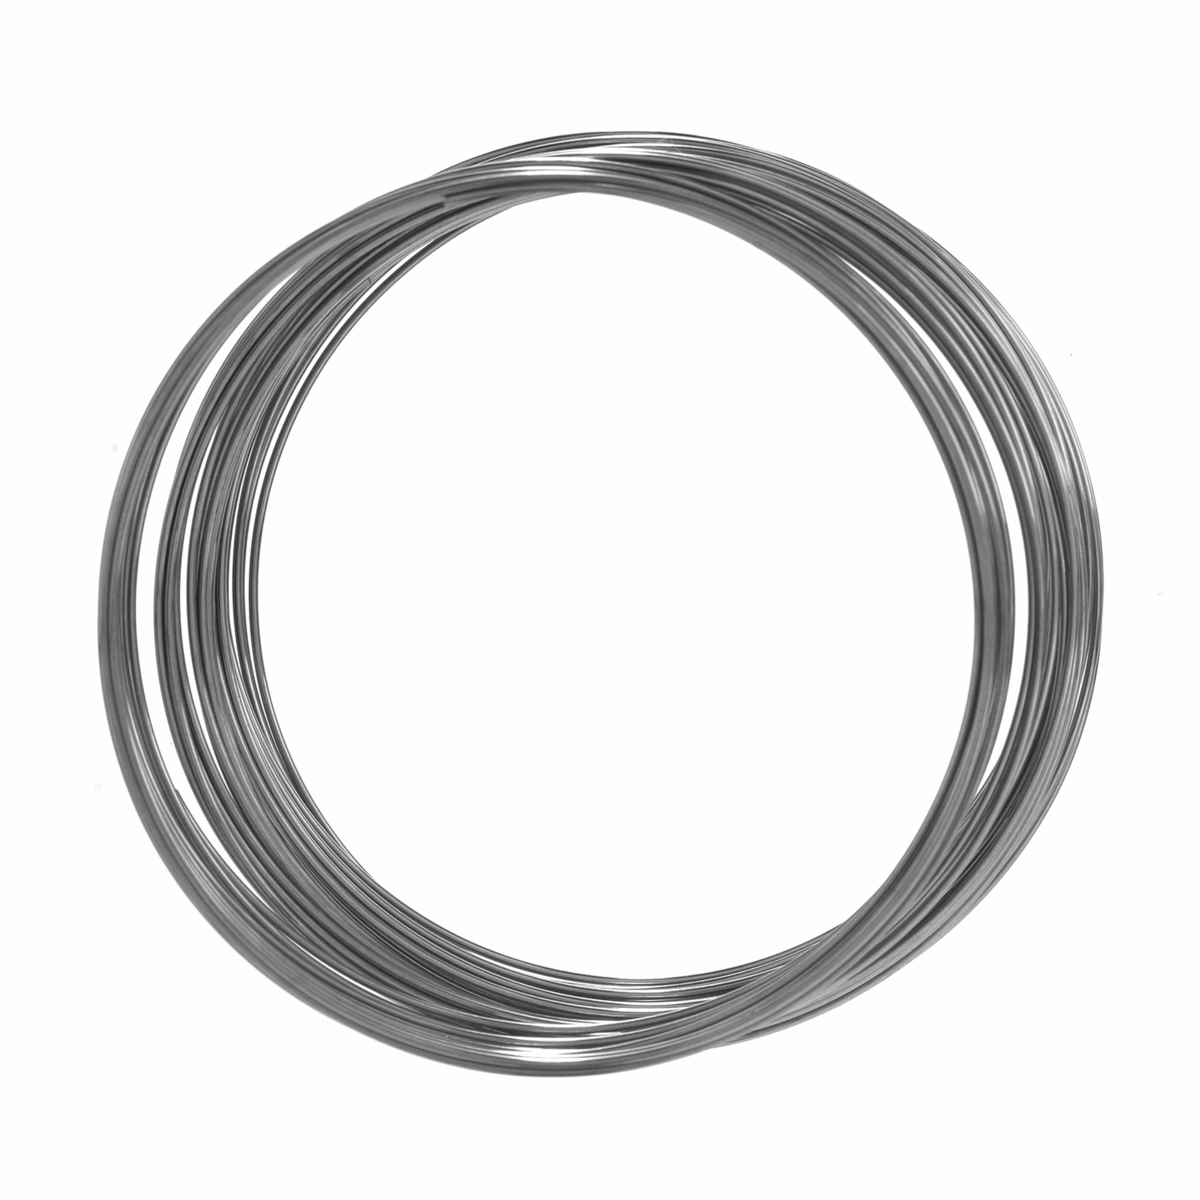 Trimits 5cm Memory Wire Rings - 4 Coils